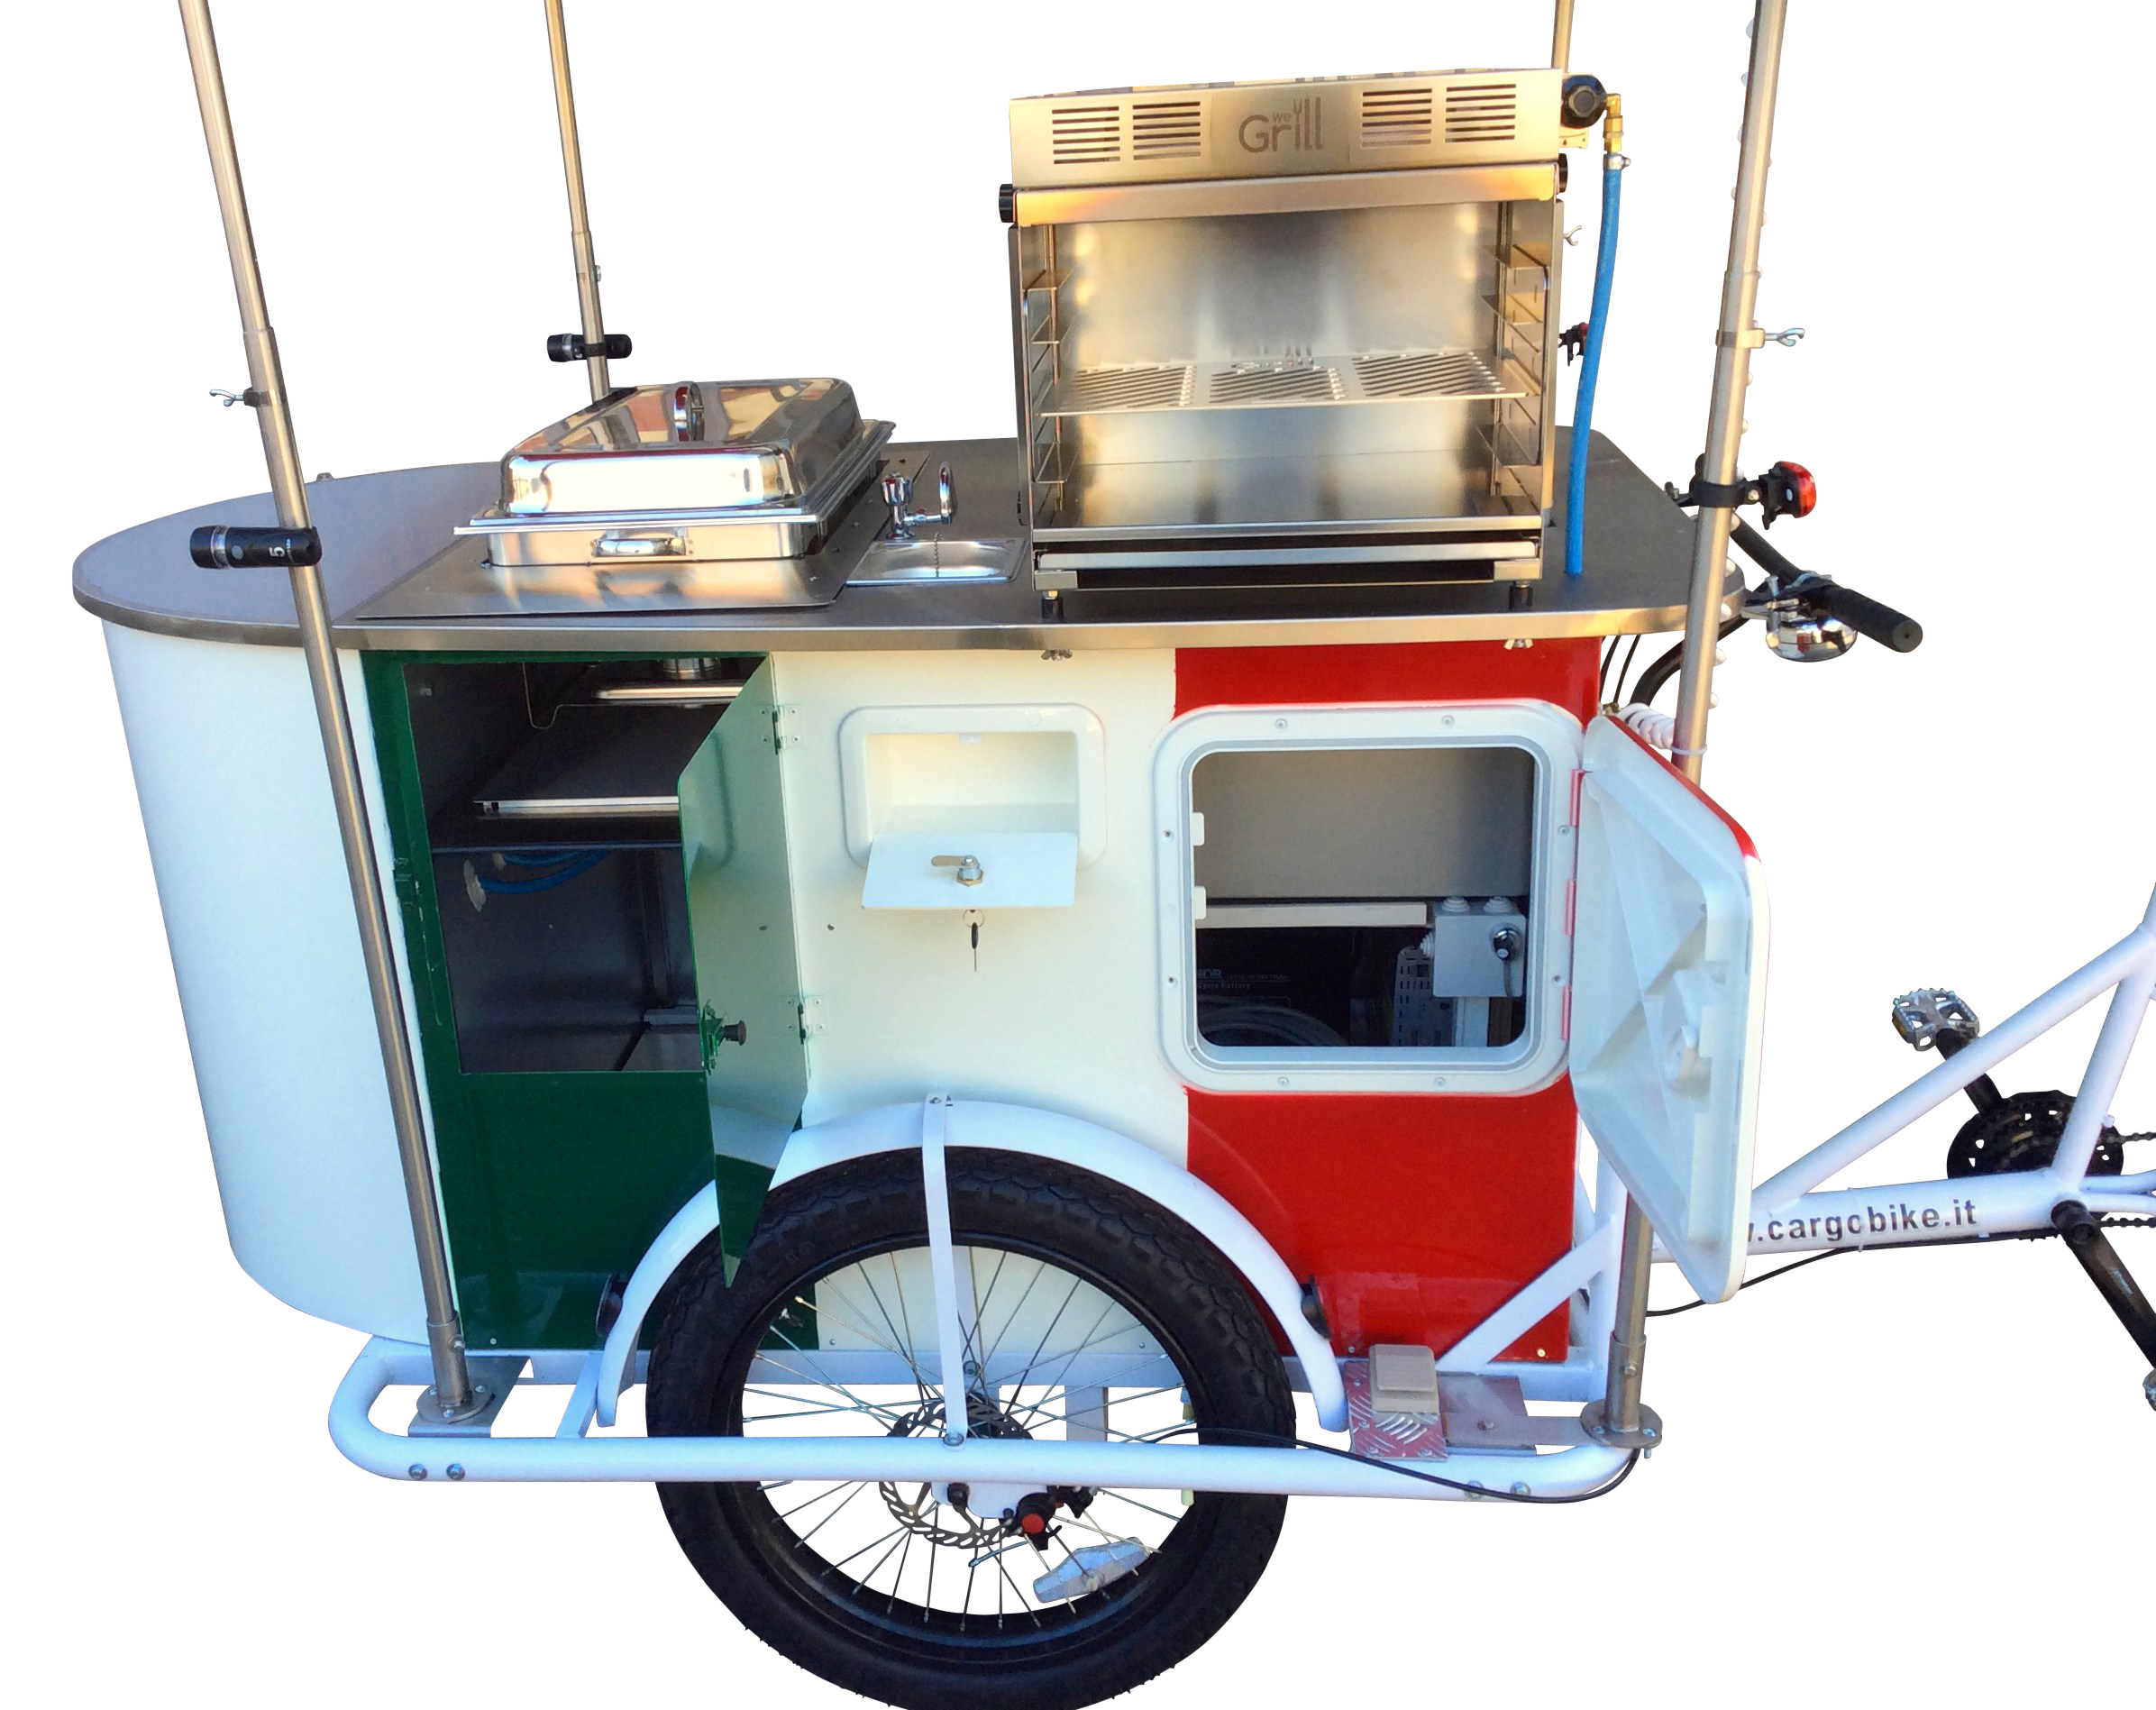 STREET_FOOD_GRILL_REVIVAL_TRICICLO_CARGO_BIKE_12